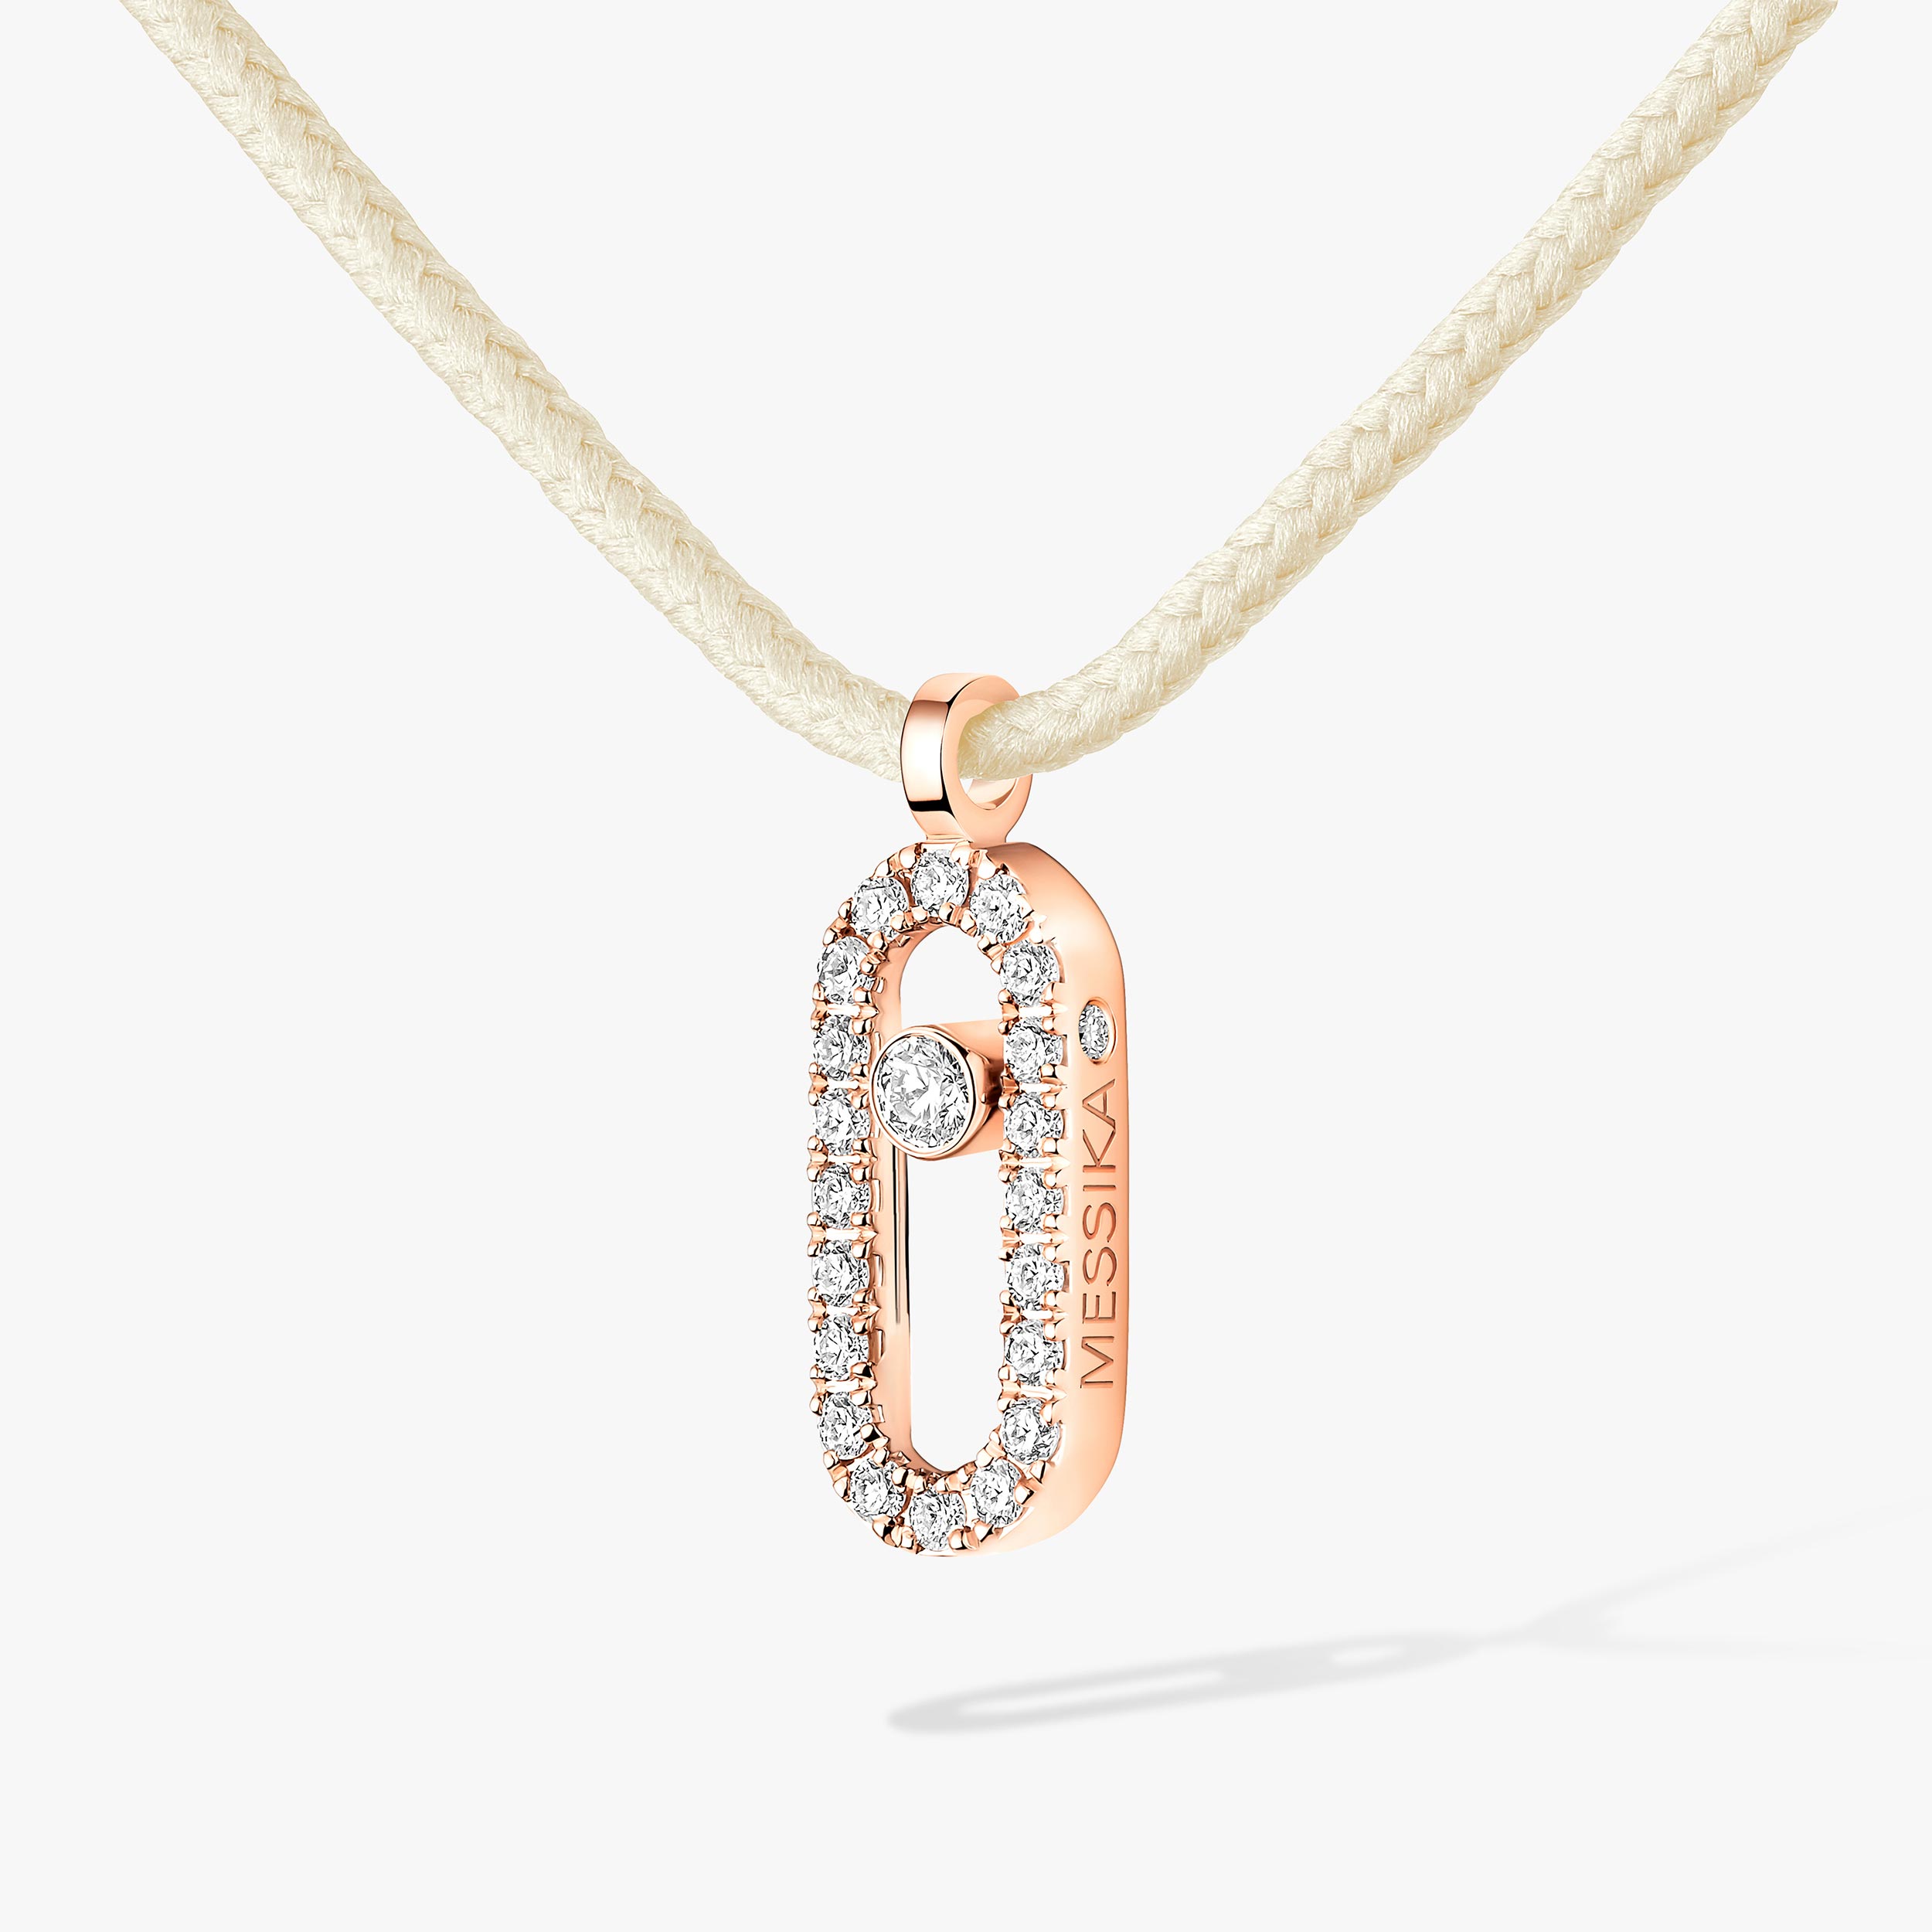 Necklace For Her Pink Gold Diamond Messika CARE(S) Cream Cord Pavé Necklace 14104-PG